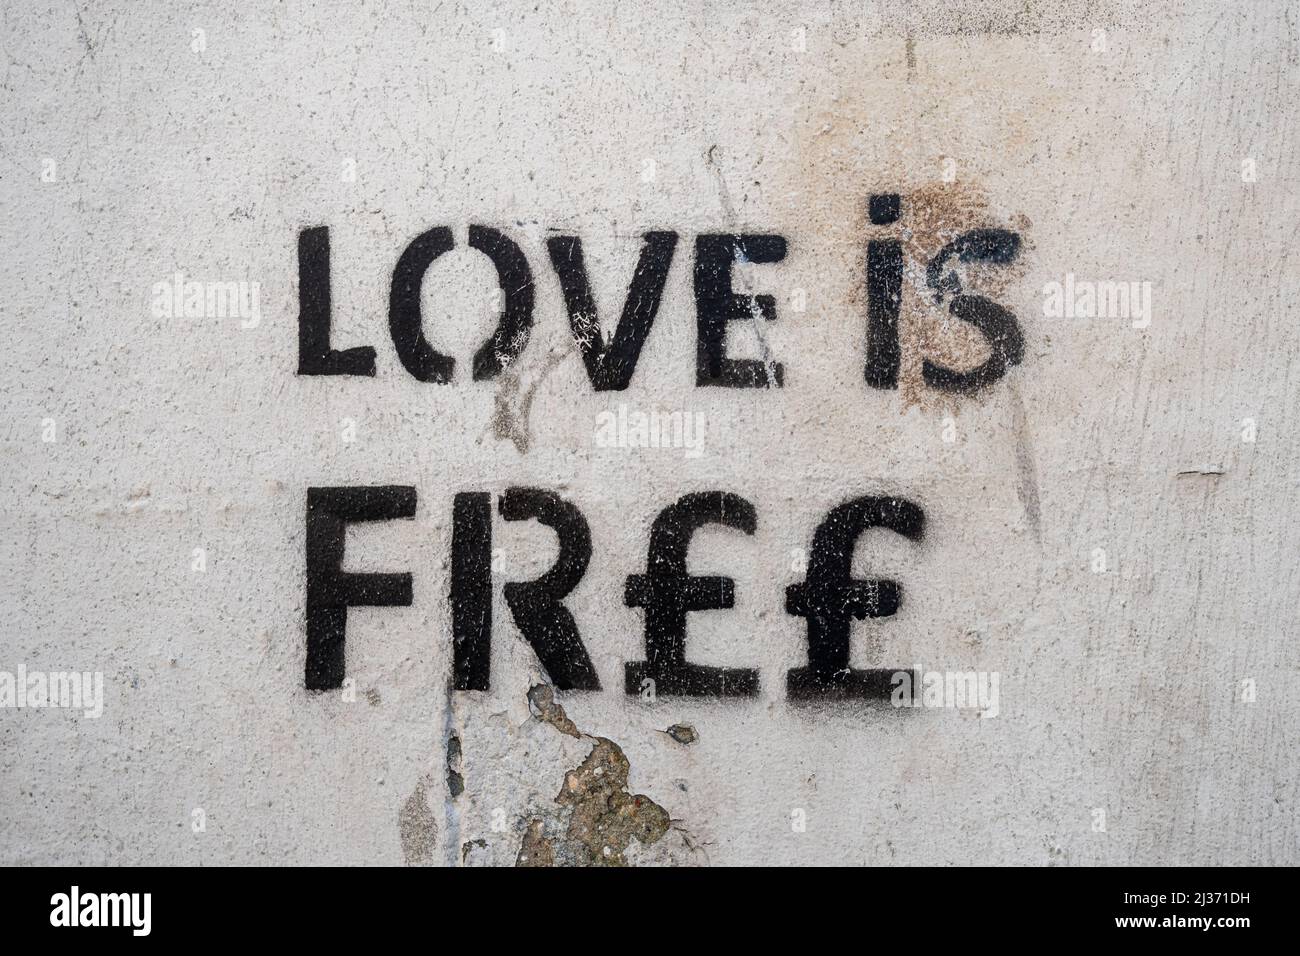 Love is Free graffiti on wall (love is fr££ with pound signs), stencil graffiti Stock Photo